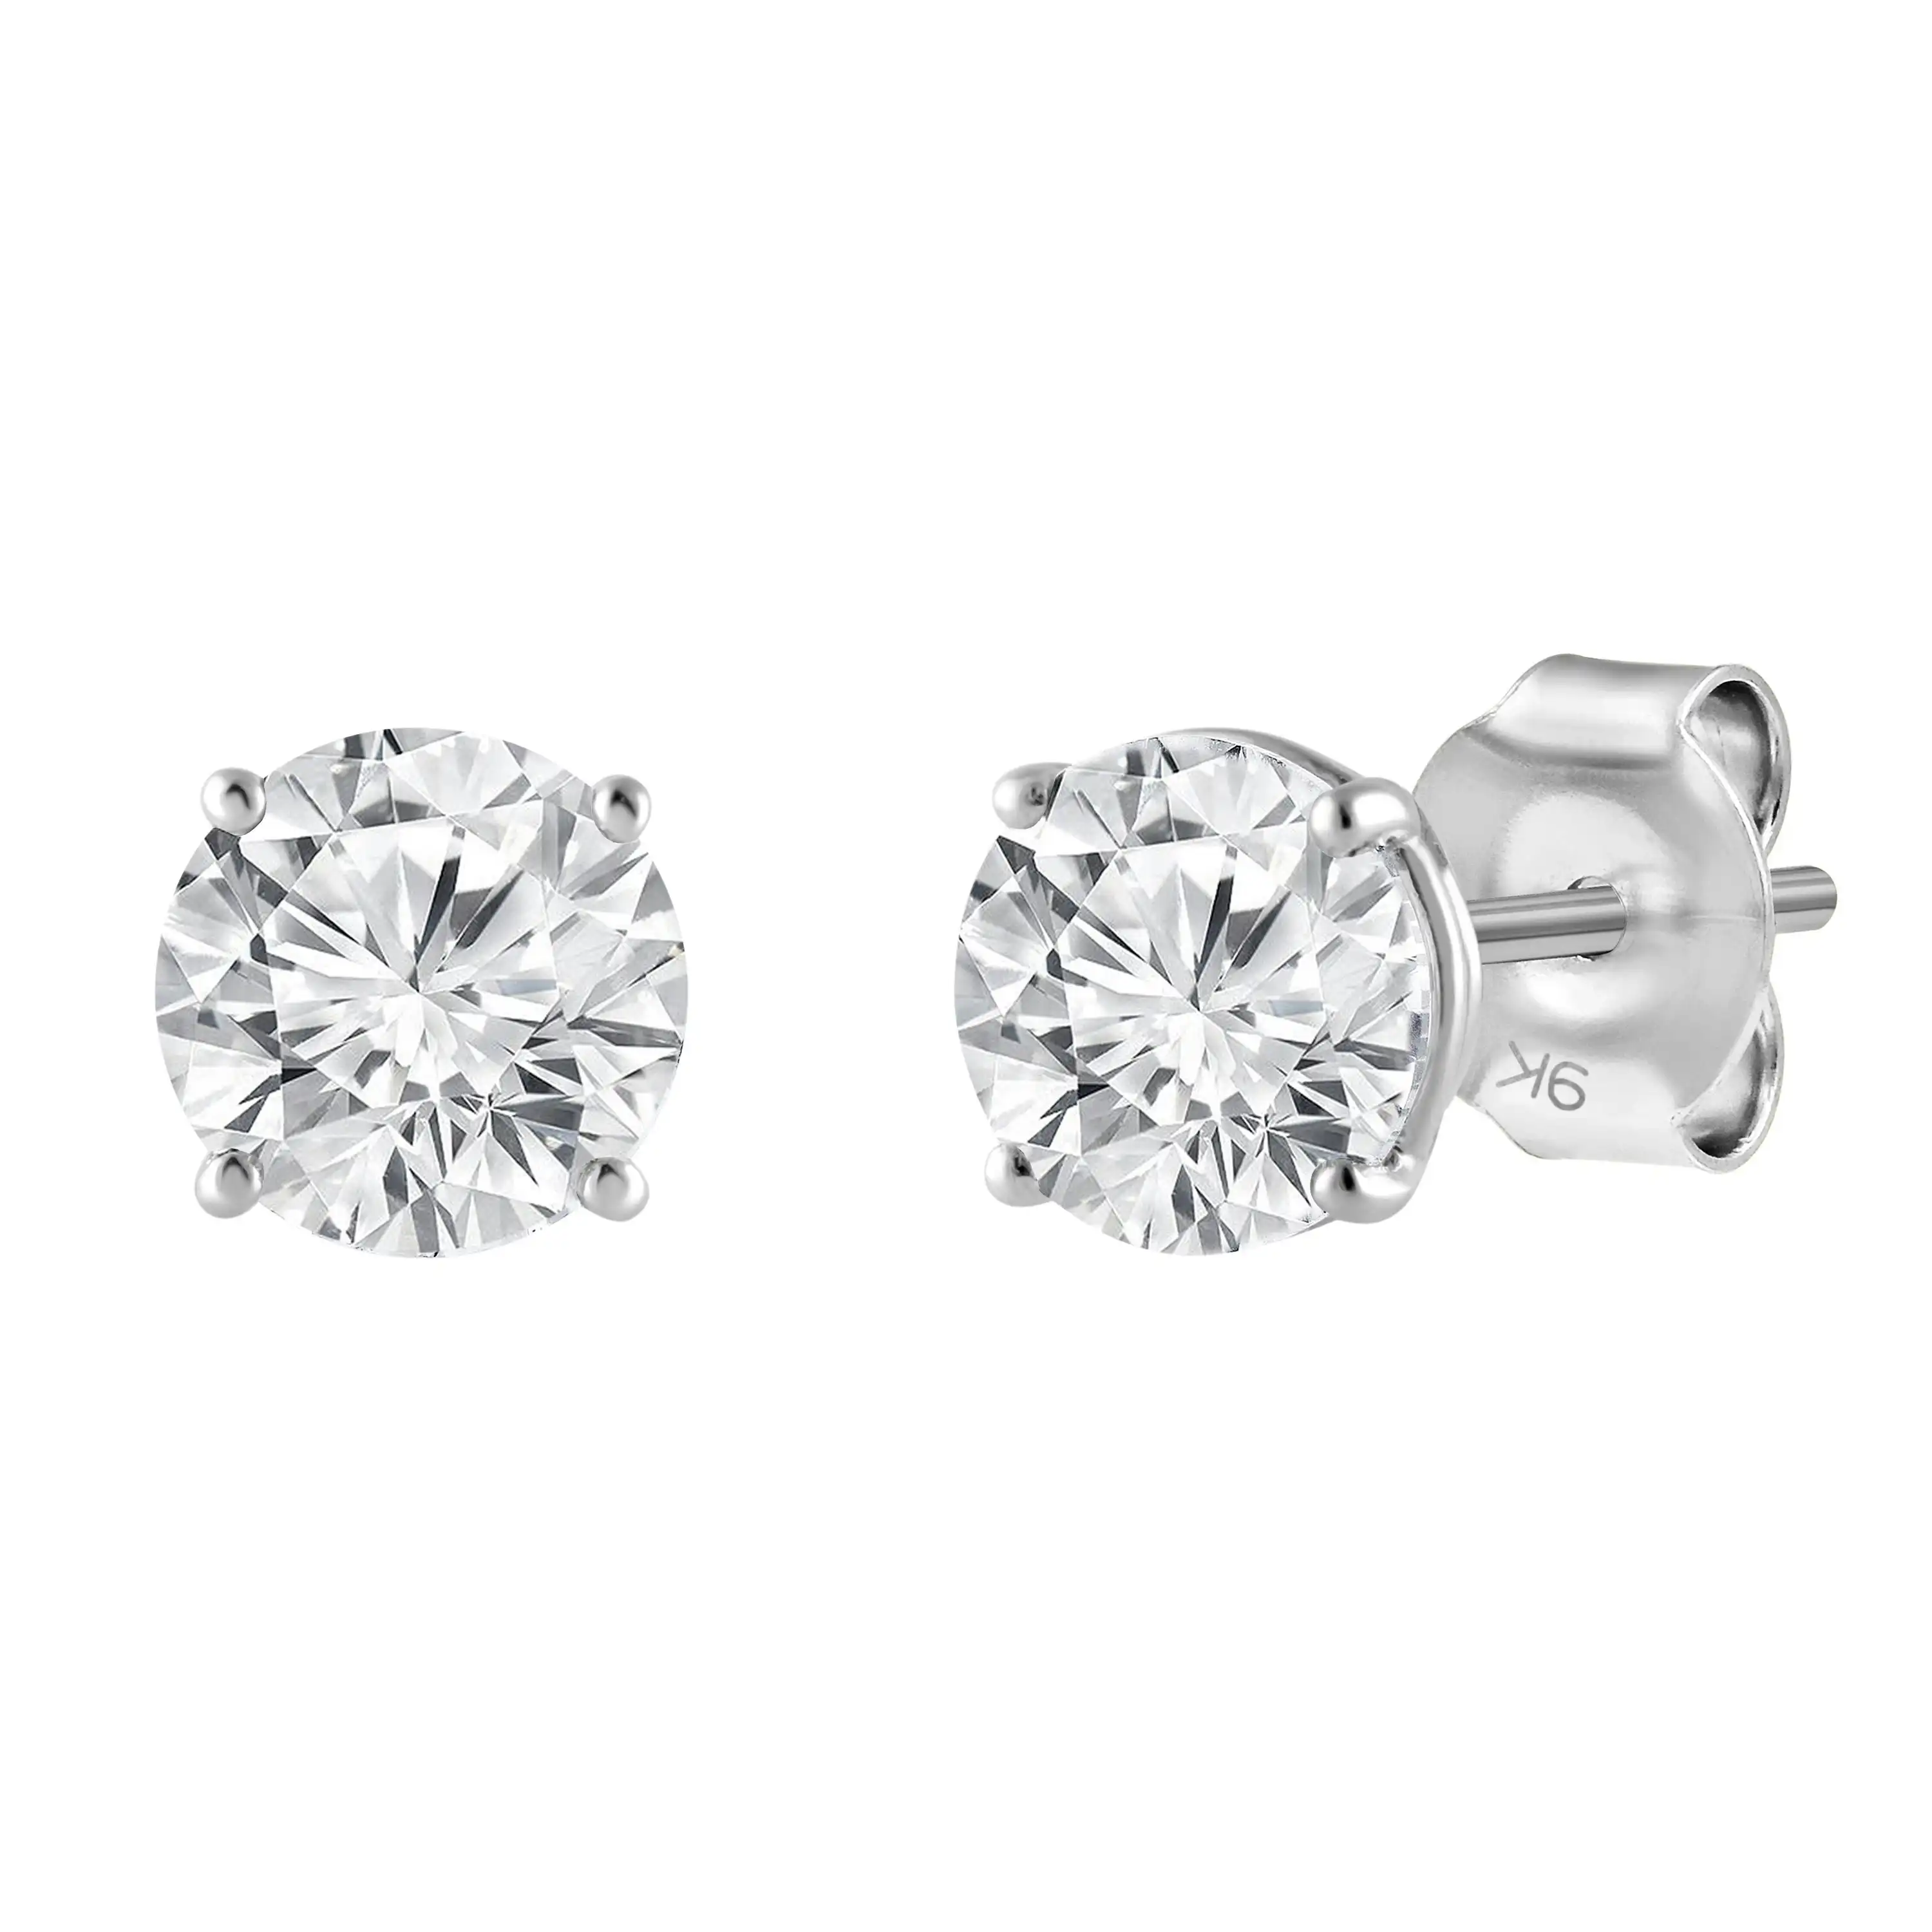 Meera 1.00ct Solitaire Laboratory Grown Diamond Earrings in 9ct White Gold